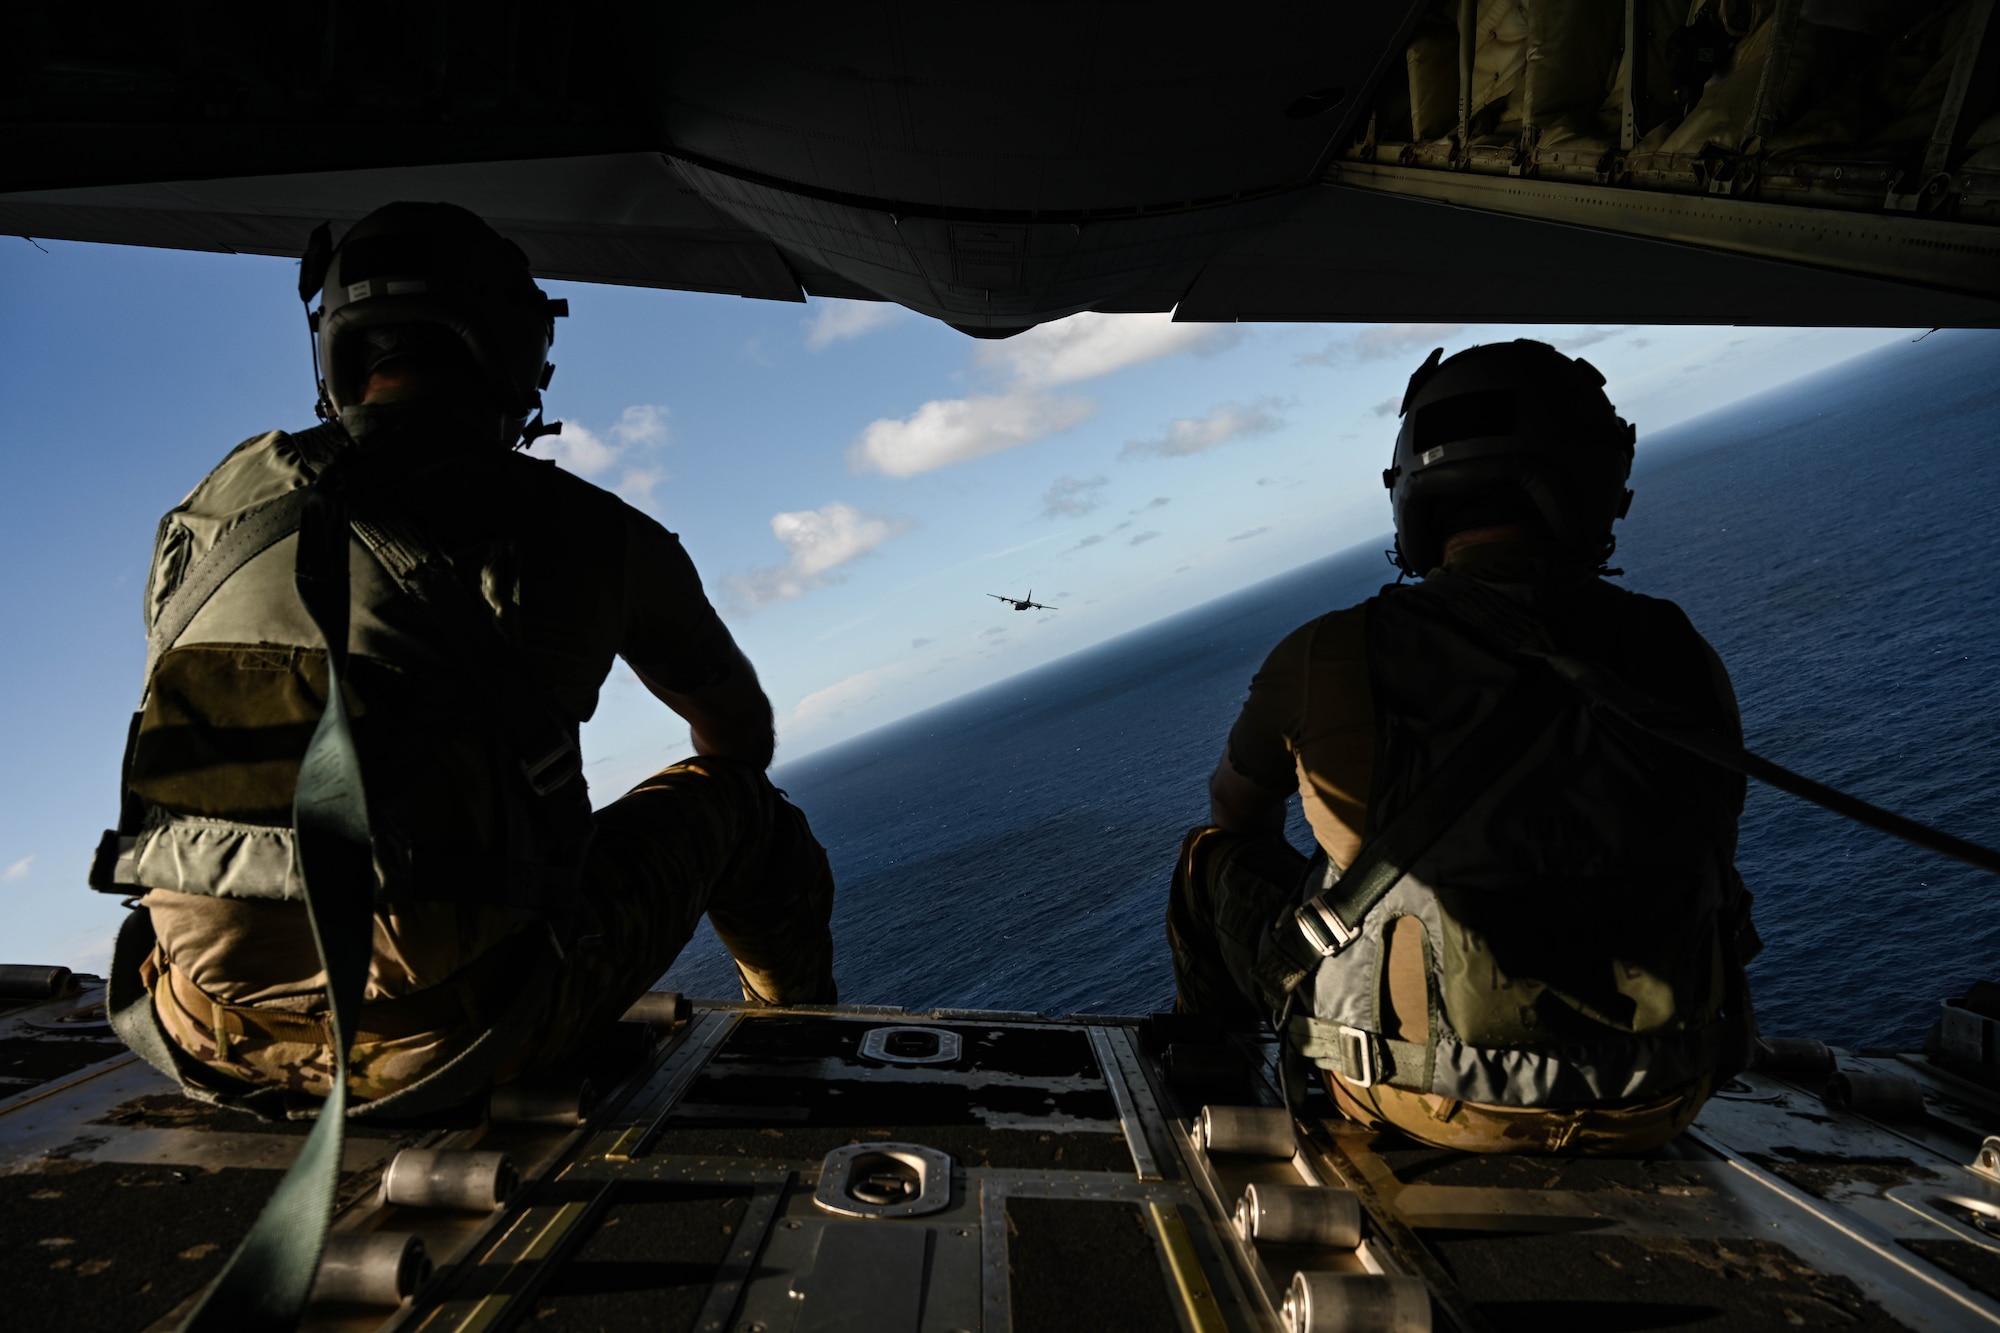 Two men in uniform watch a military aircraft fly over the ocean